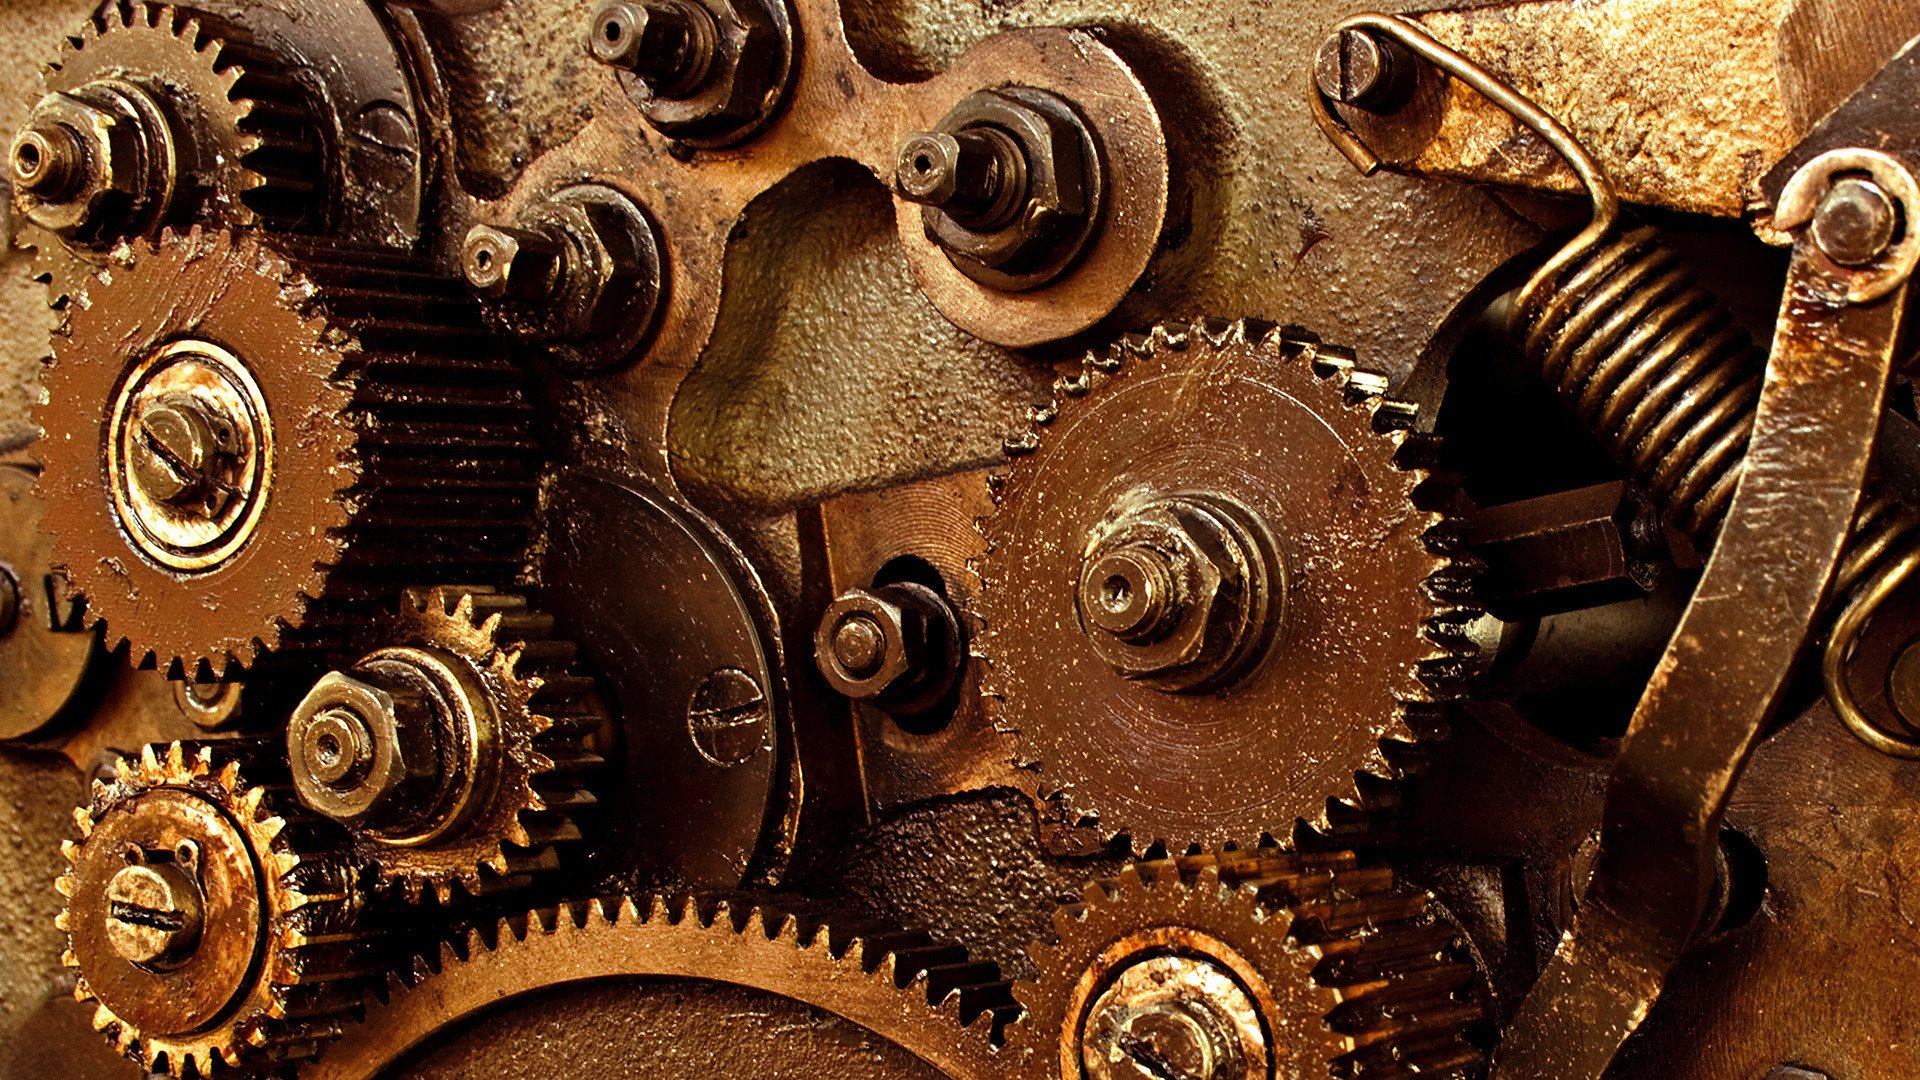 [47+] Mechanical Engineering Wallpapers for PC on ...